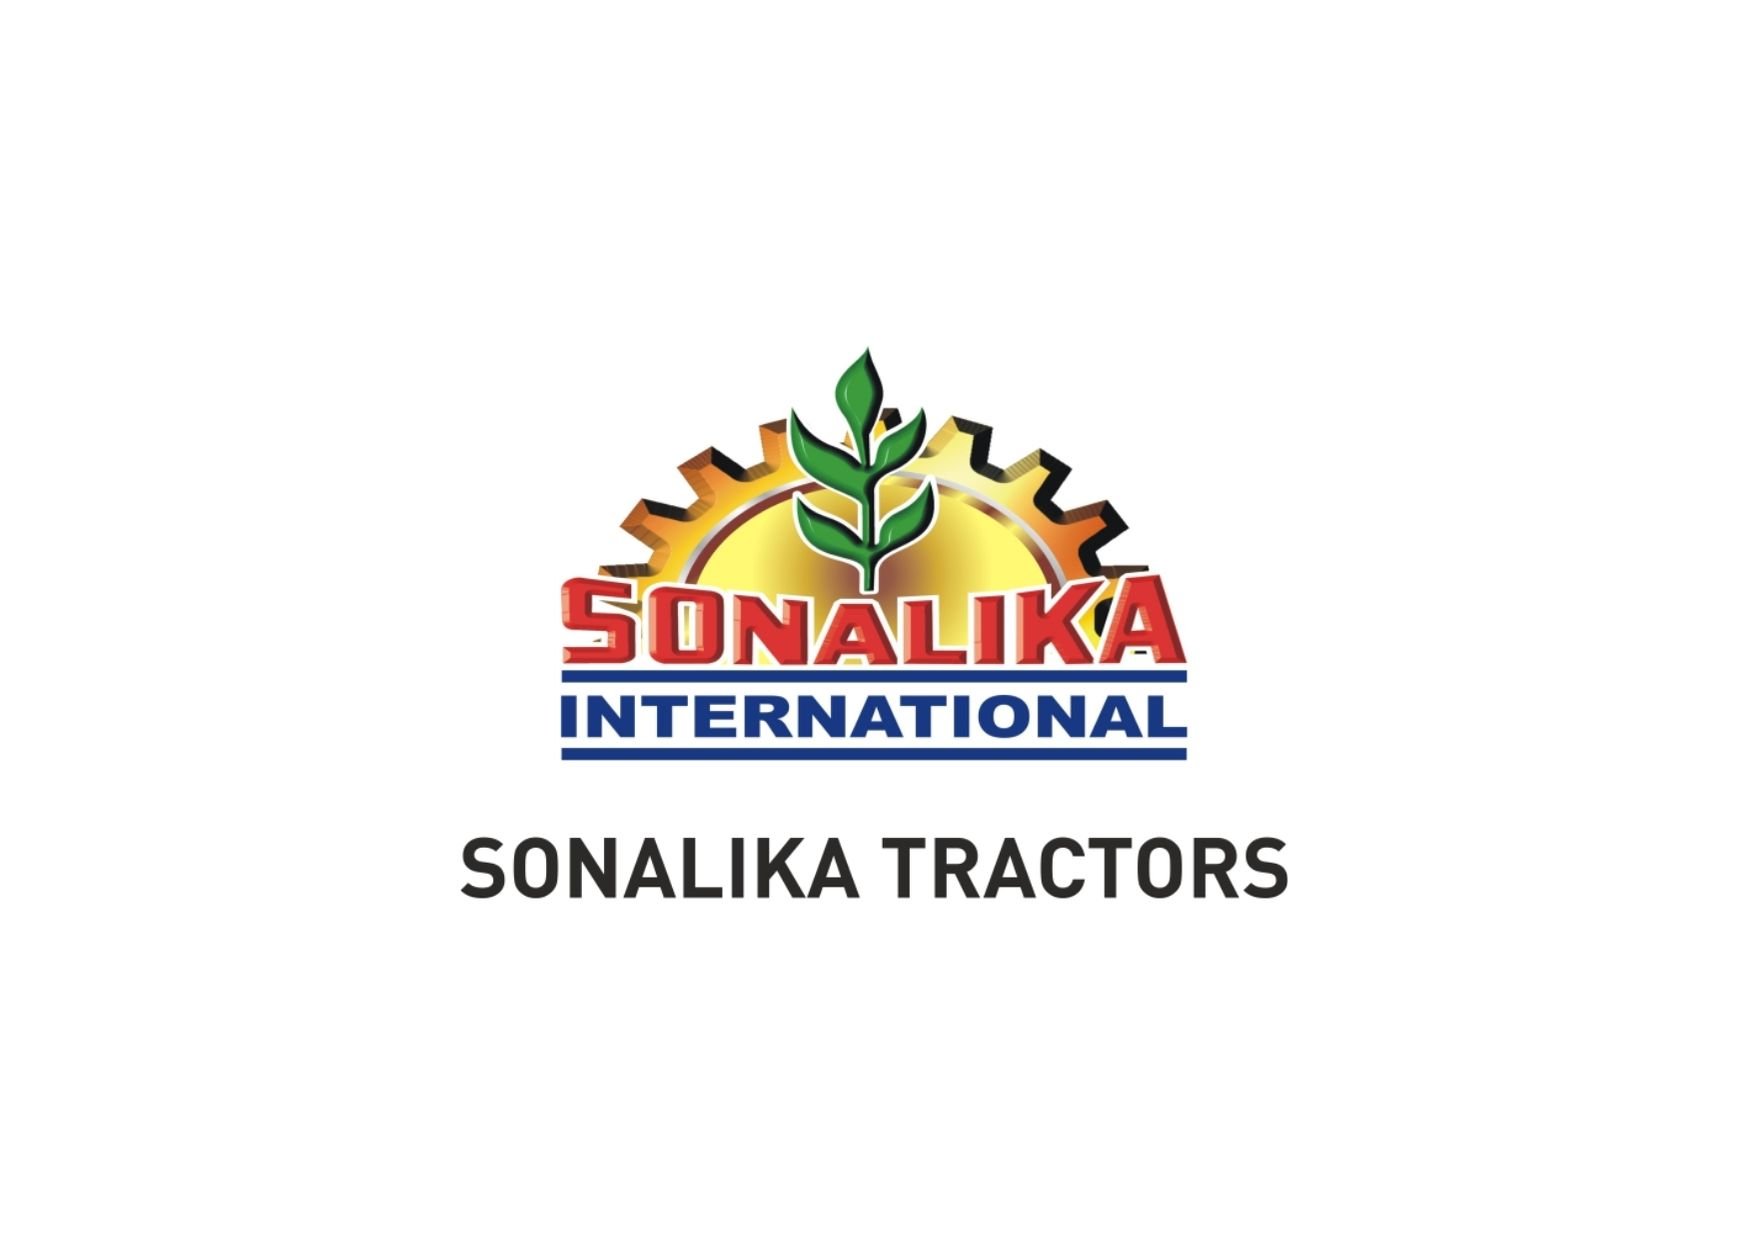 New Sonalika Tiger DI 75 4WD Tractor Launch Price Rs 11 Lakh